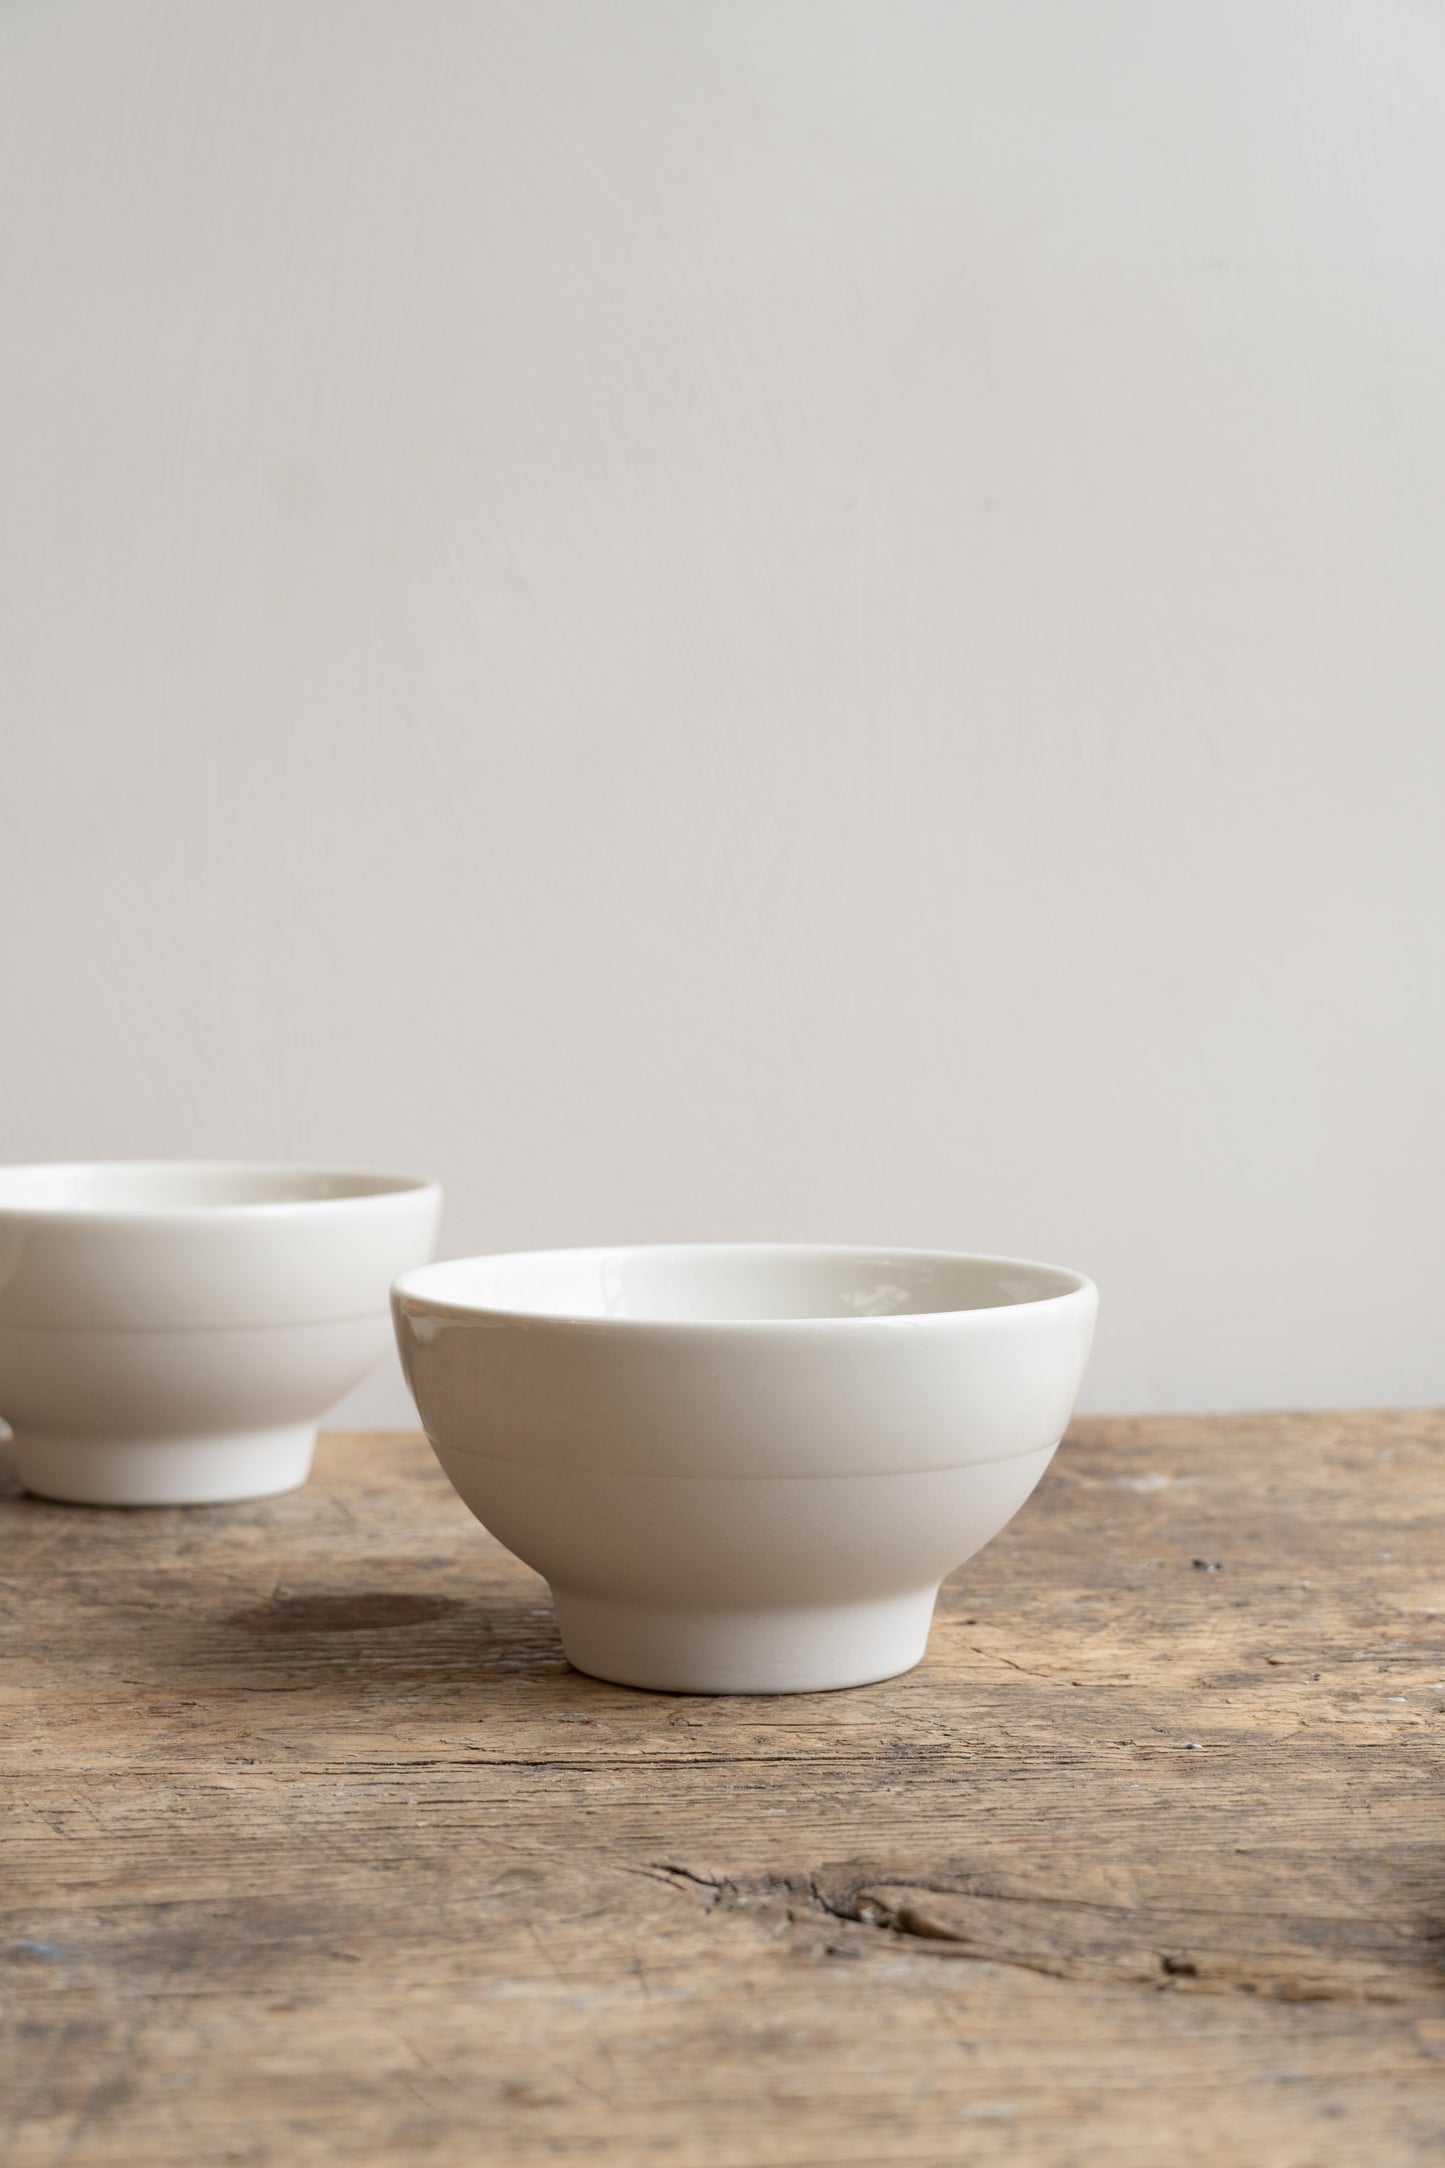 Jars Antibes Bowl White by Jars Ceramistes. Two bowls on wooden table.